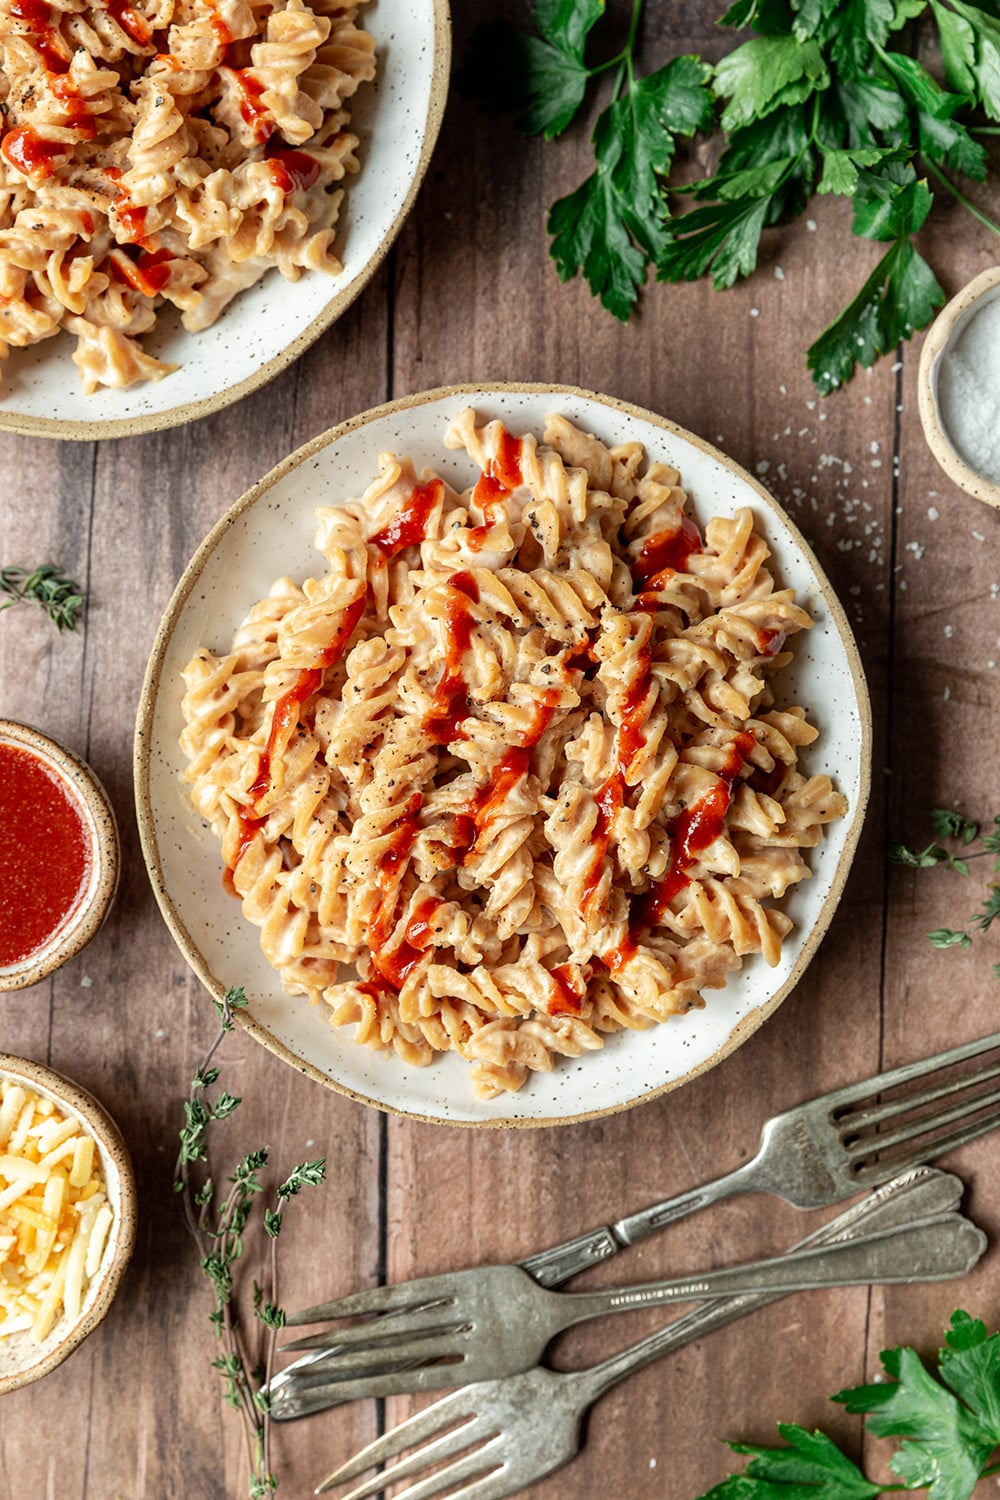 This Vegan Sriracha Mac & Cheese Recipe takes a traditional favorite and spices it up